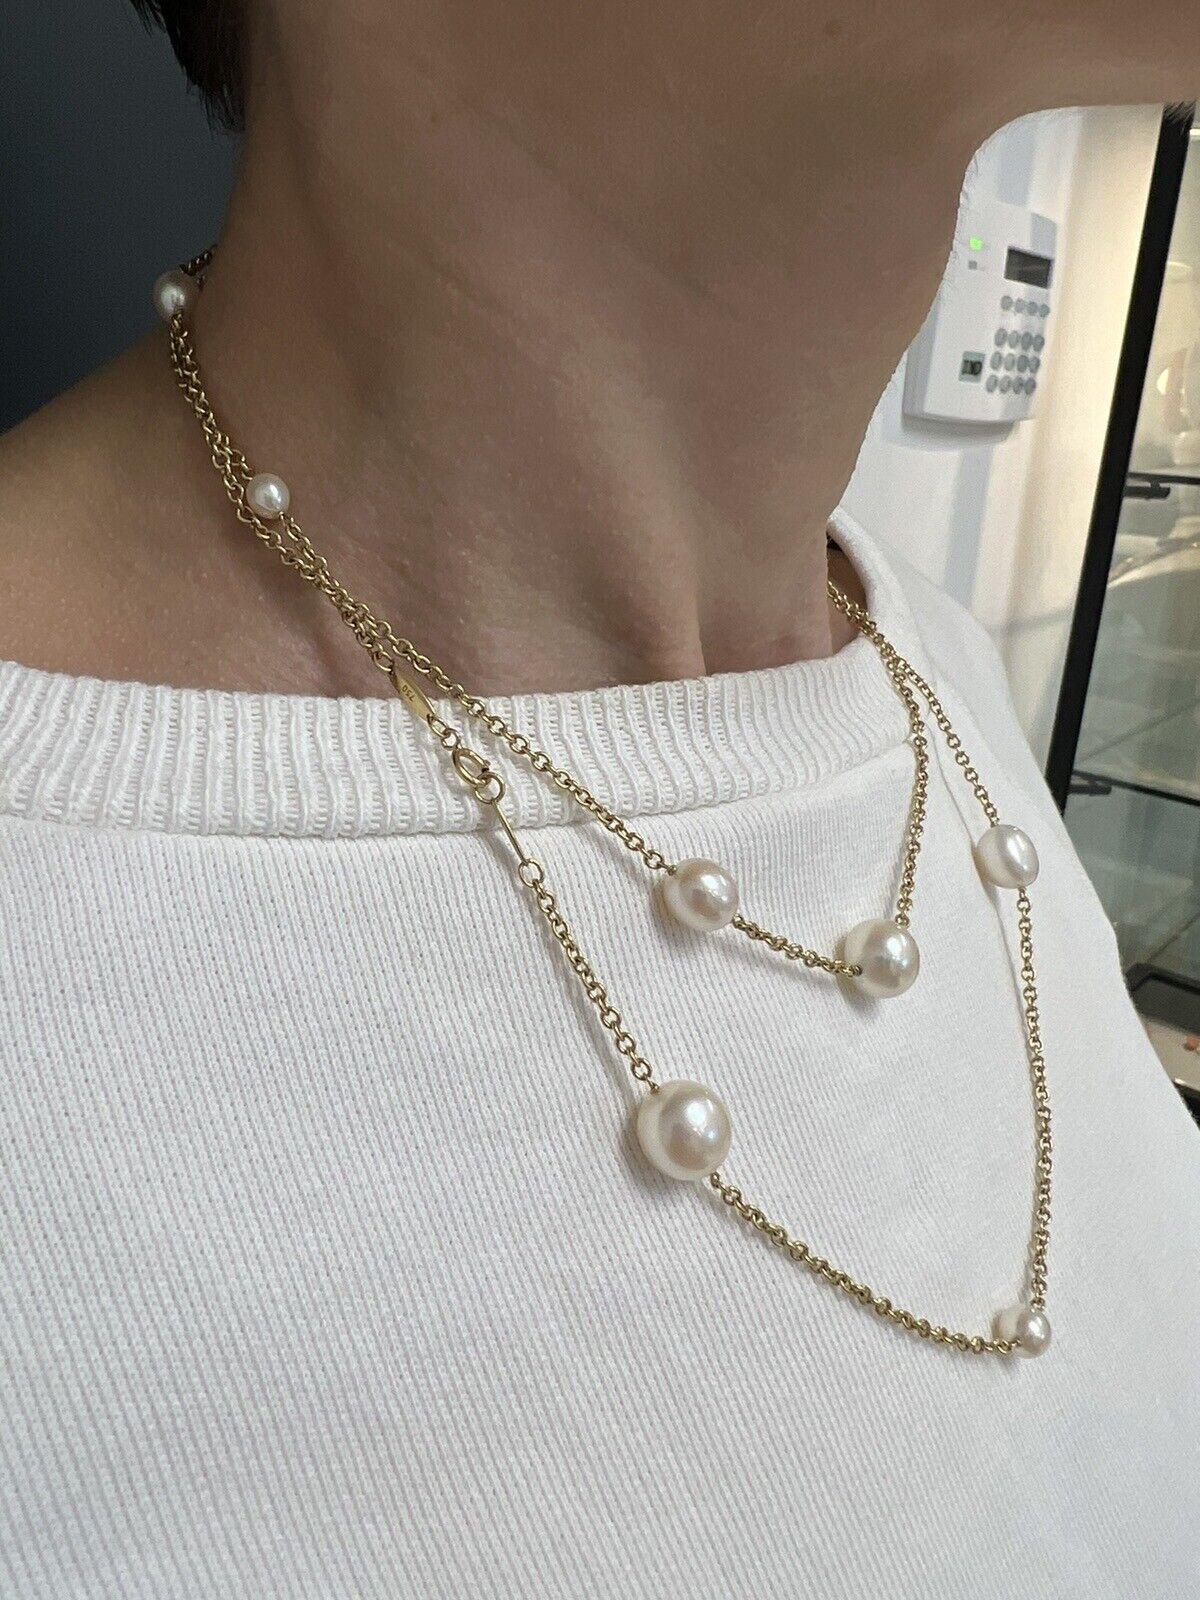 Tiffany & Co. Elsa Peretti 18k Yellow Gold & Pearl Sautoir Necklace Vintage Circa 1980s

Here is your chance to purchase a beautiful and highly collectible designer necklace.   

18KT  YELLOW GOLD TIFFANY & CO PEARLS BY THE YARD NECKLACE.  MEASURES